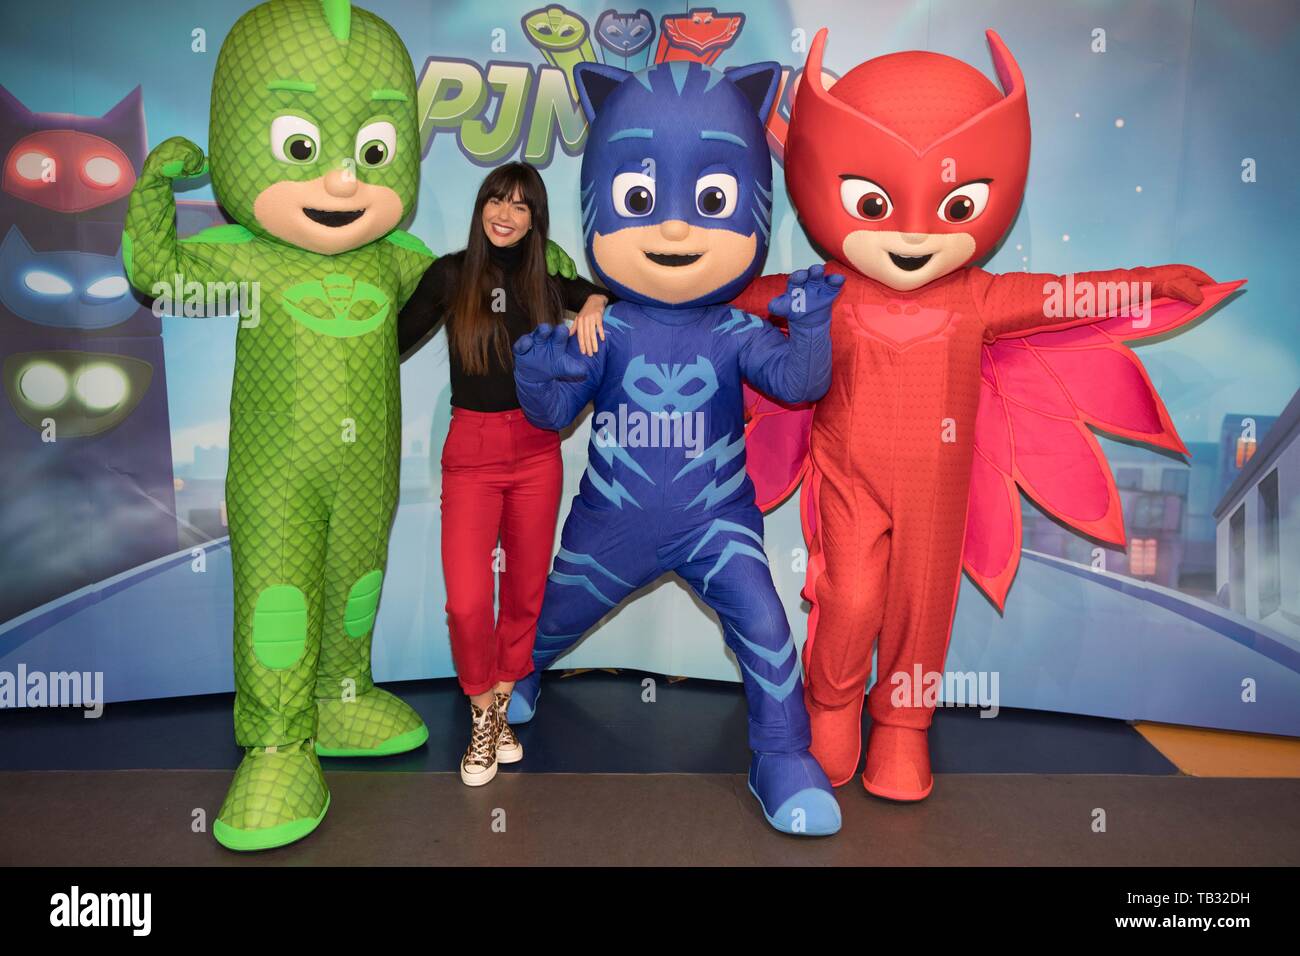 Jennifer Metcalfe at Hamleys to help PJ Masks to save the day... and  celebrate National Superhero Day. PJ Masks is a show about ordinary kids  who become pyjama-clad superheroes at night. Two